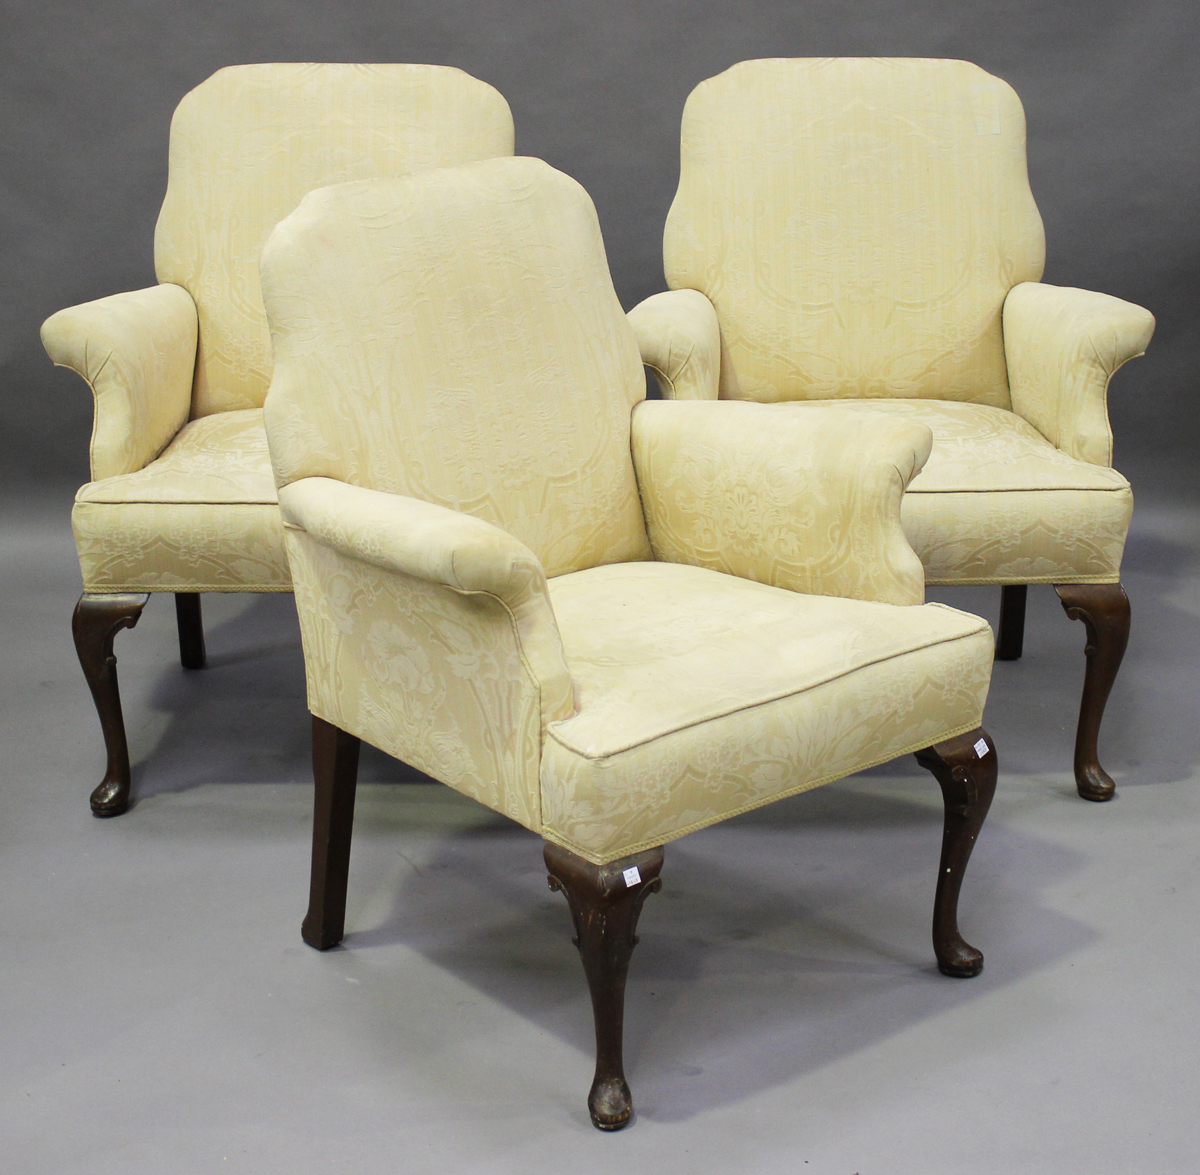 A set of three early 20th century Queen Anne style scroll armchairs, upholstered in patterned yellow